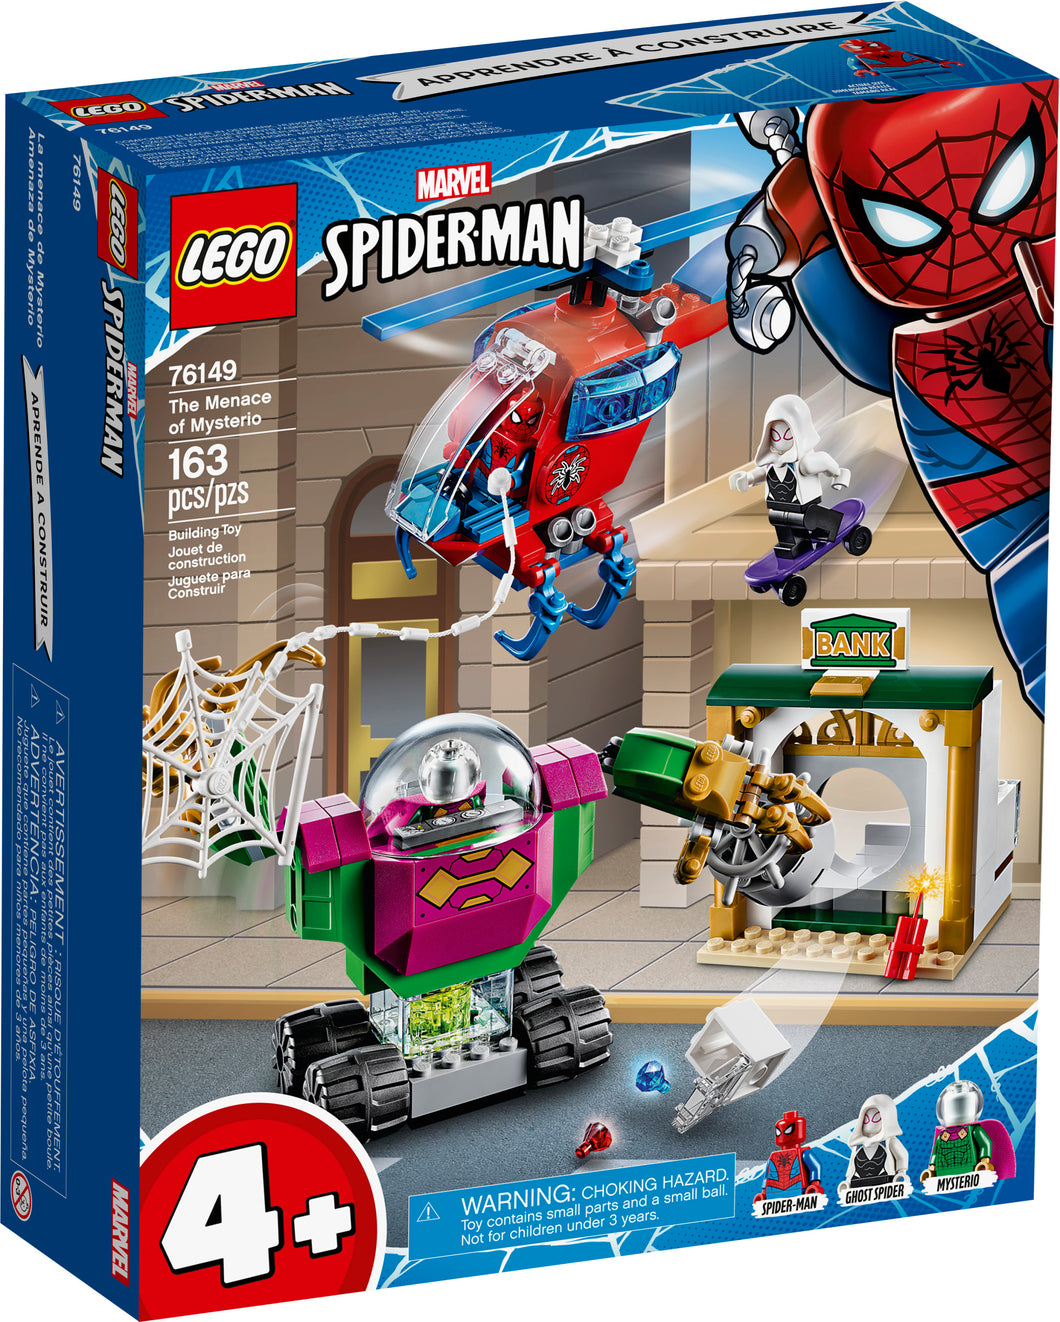 LEGO® Marvel Spider-Man 76149 The Menace of Mysterio (163 pieces)